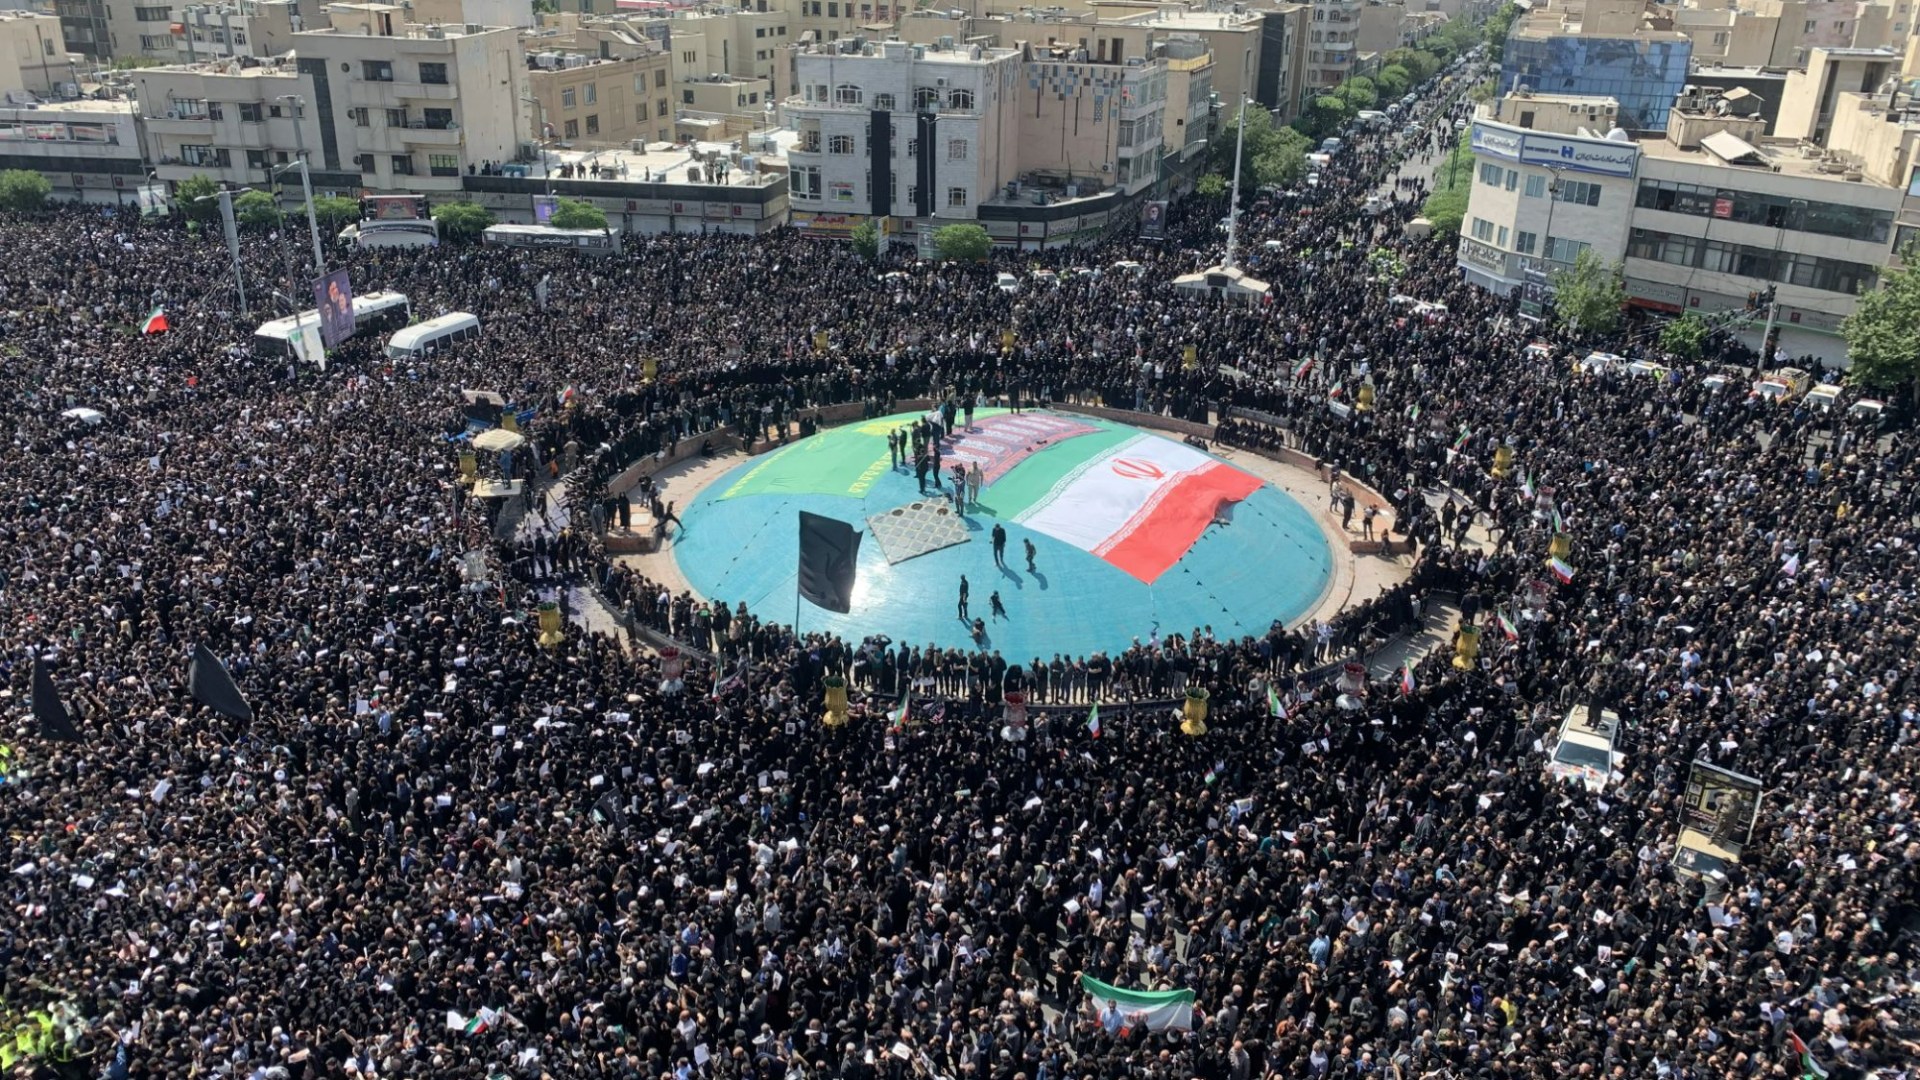 Death to Israel chants as Ayatollah leads huge funeral service for Iran butcher president killed in chopper crash [Video]